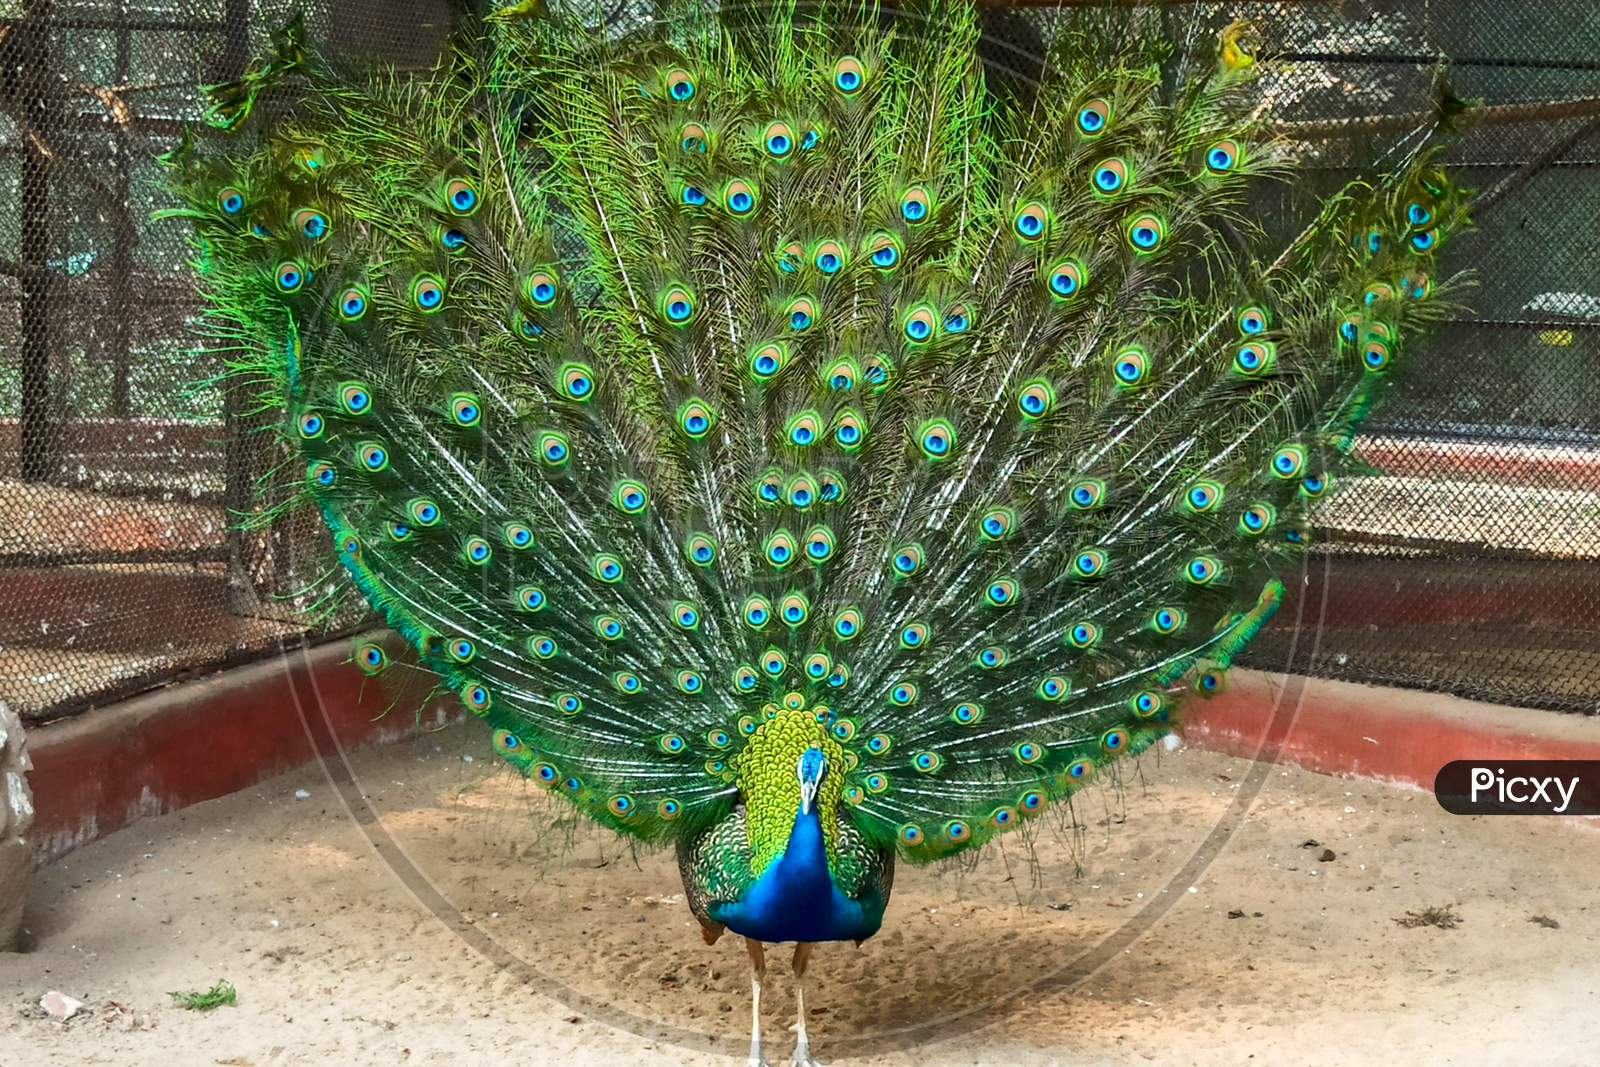 Colorful peacock exhibiting at the zoo in Salvador Bahia, Brazil